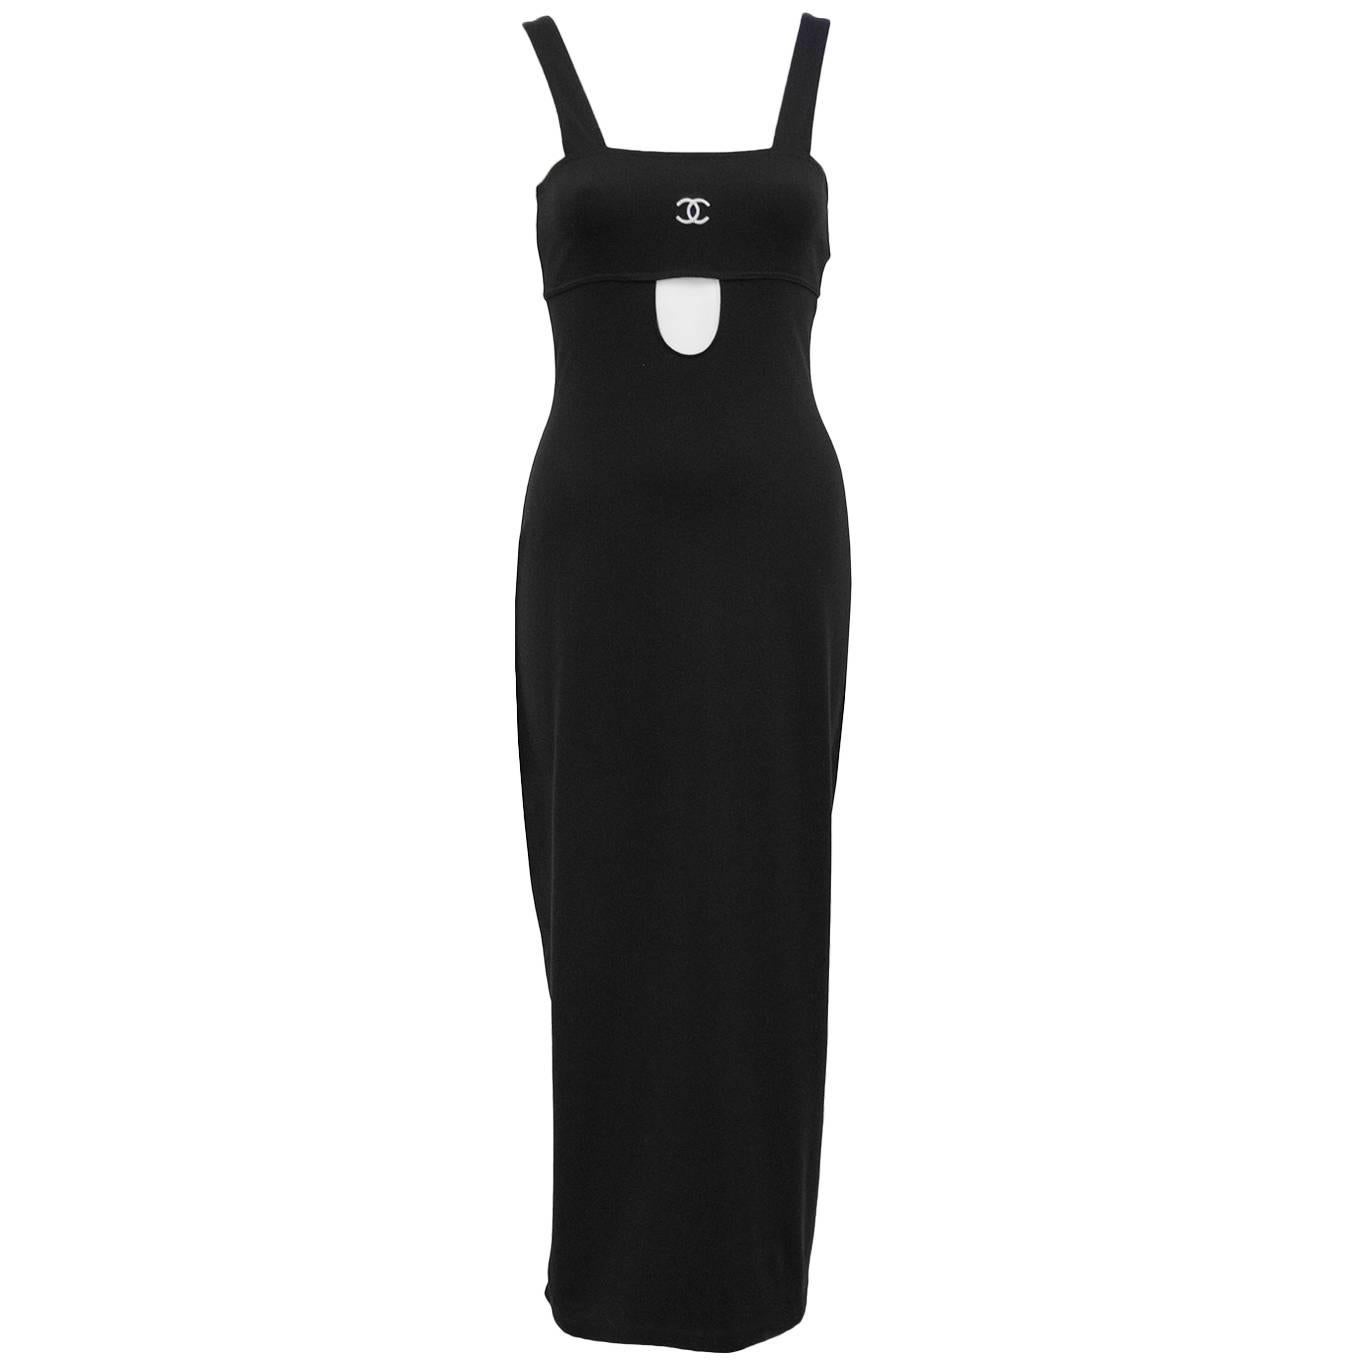 Azule Collection - Wear the Chanel Bodycon Dress for your next